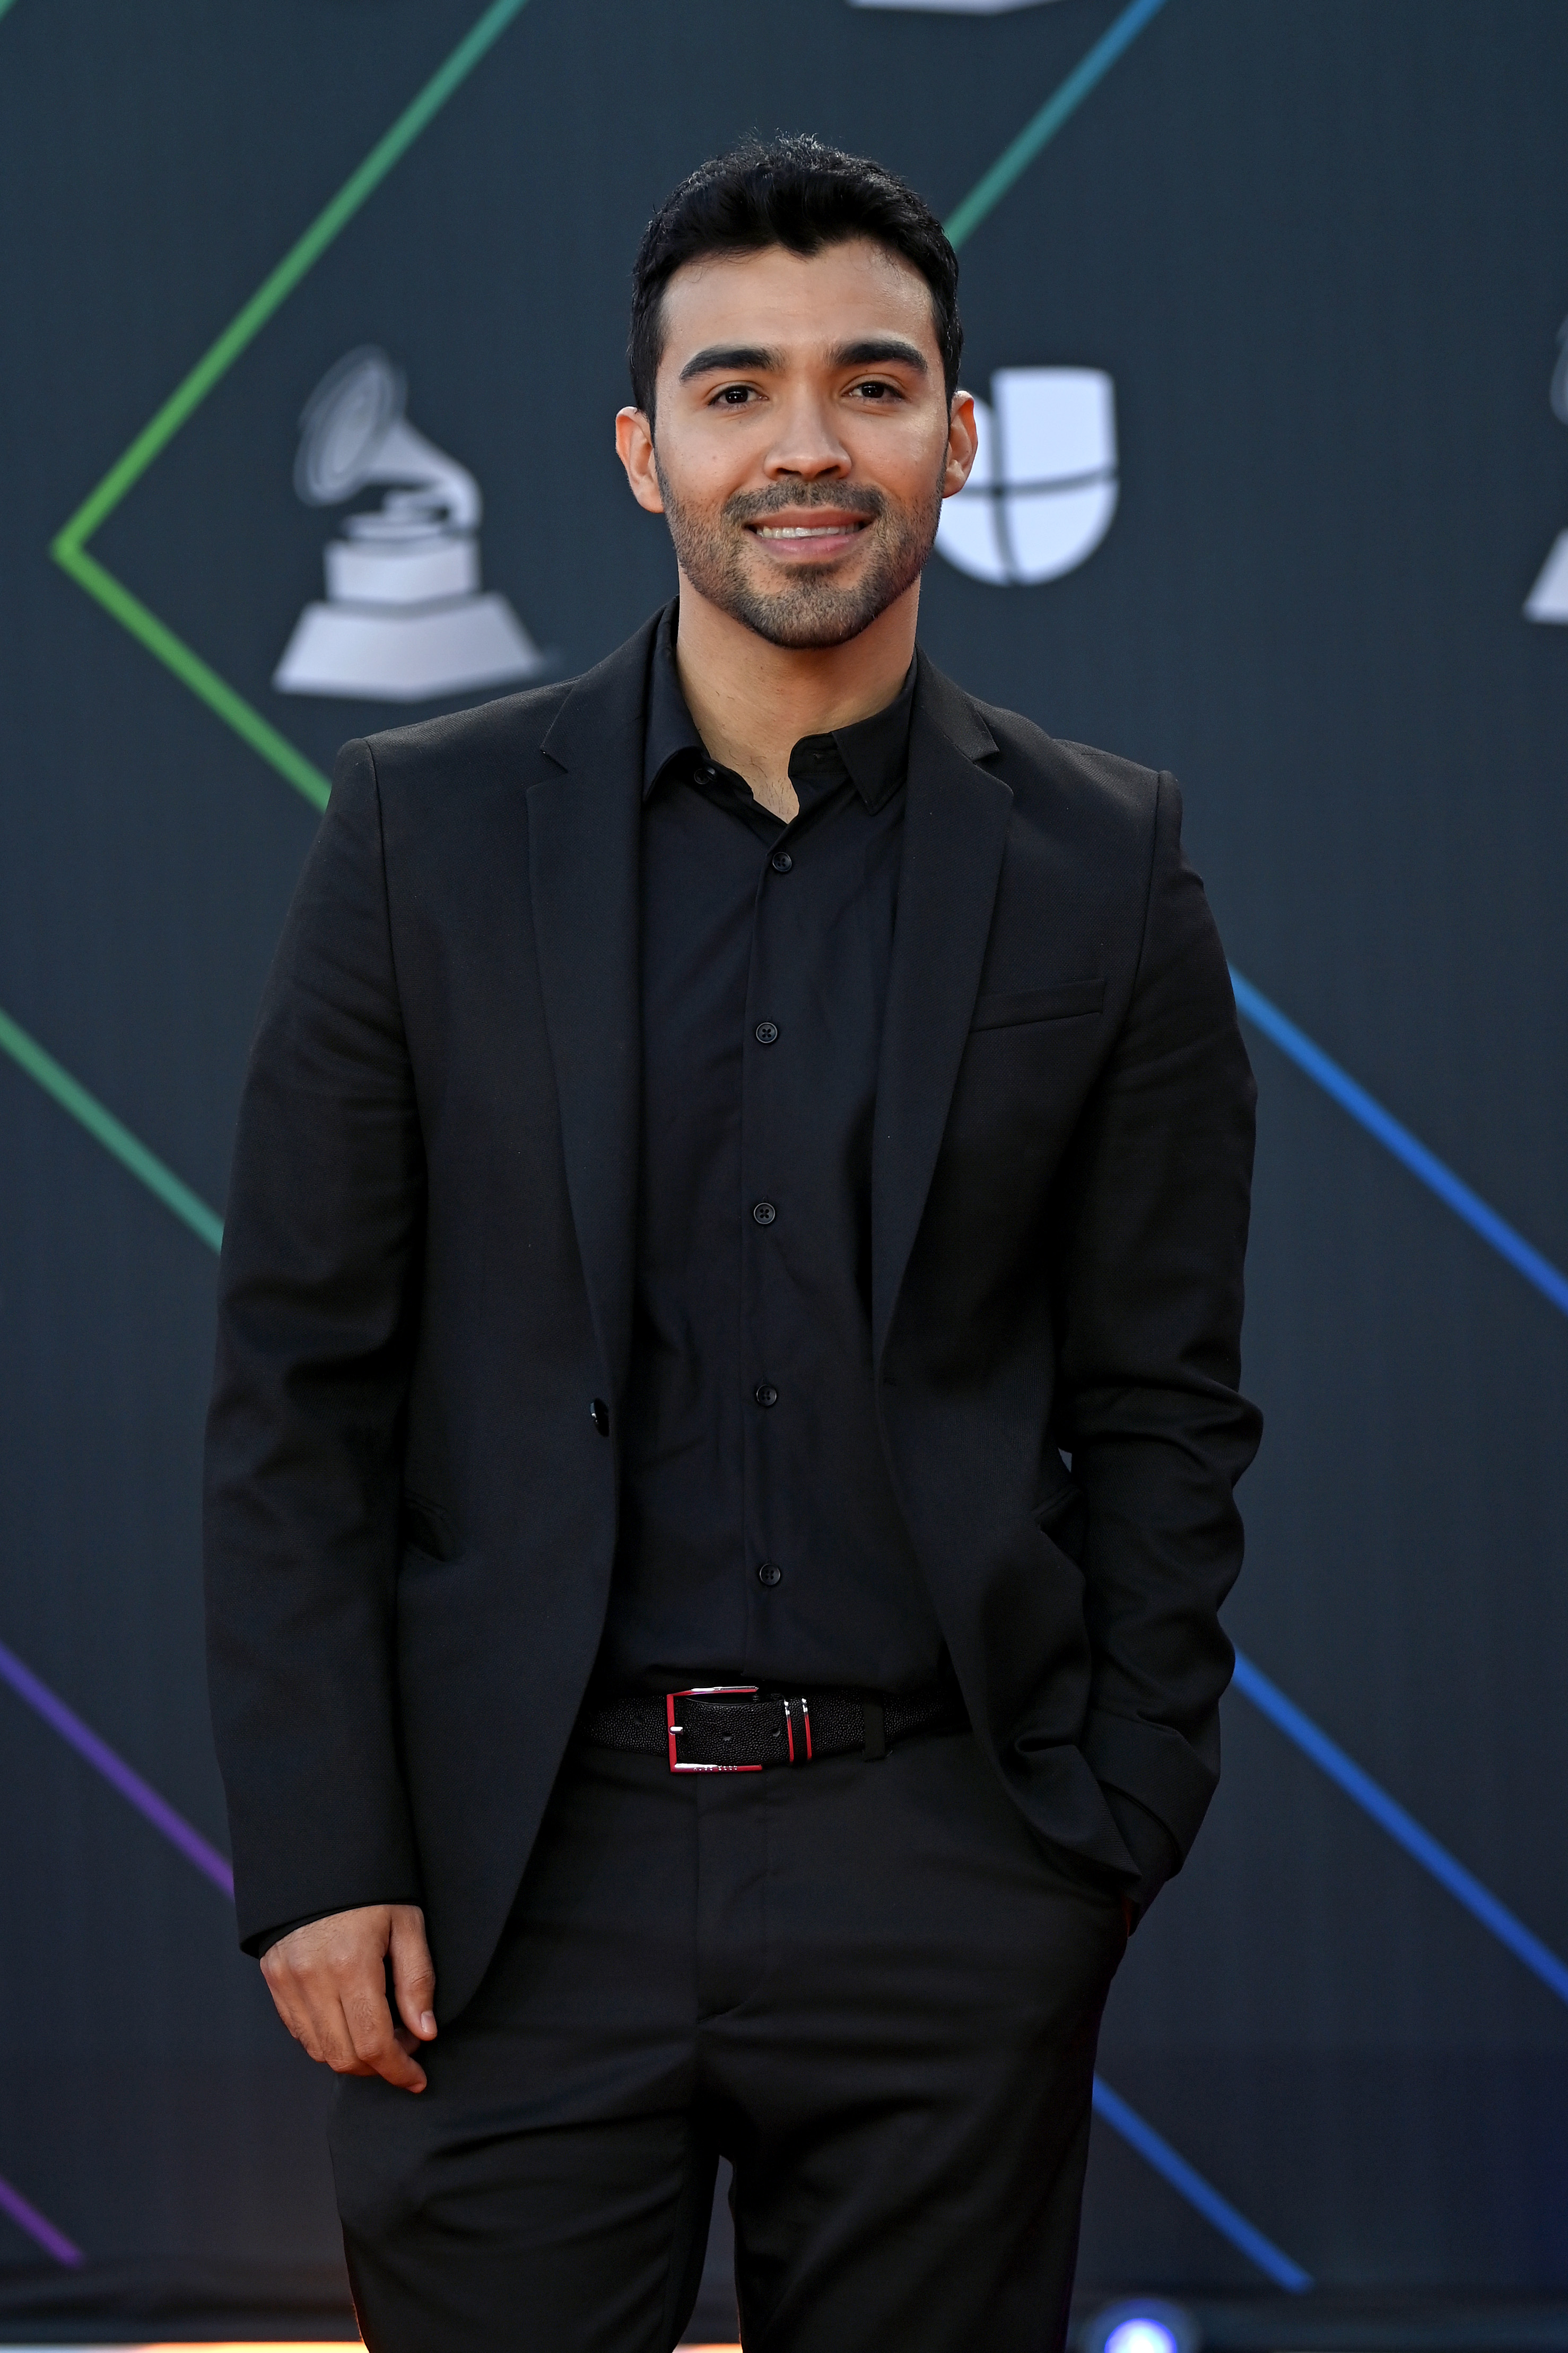 Gussy Lau attends The 22nd Annual Latin GRAMMY Awards at MGM Grand Garden Arena on November 18, 2021, in Las Vegas, Nevada. | Source: Getty Images